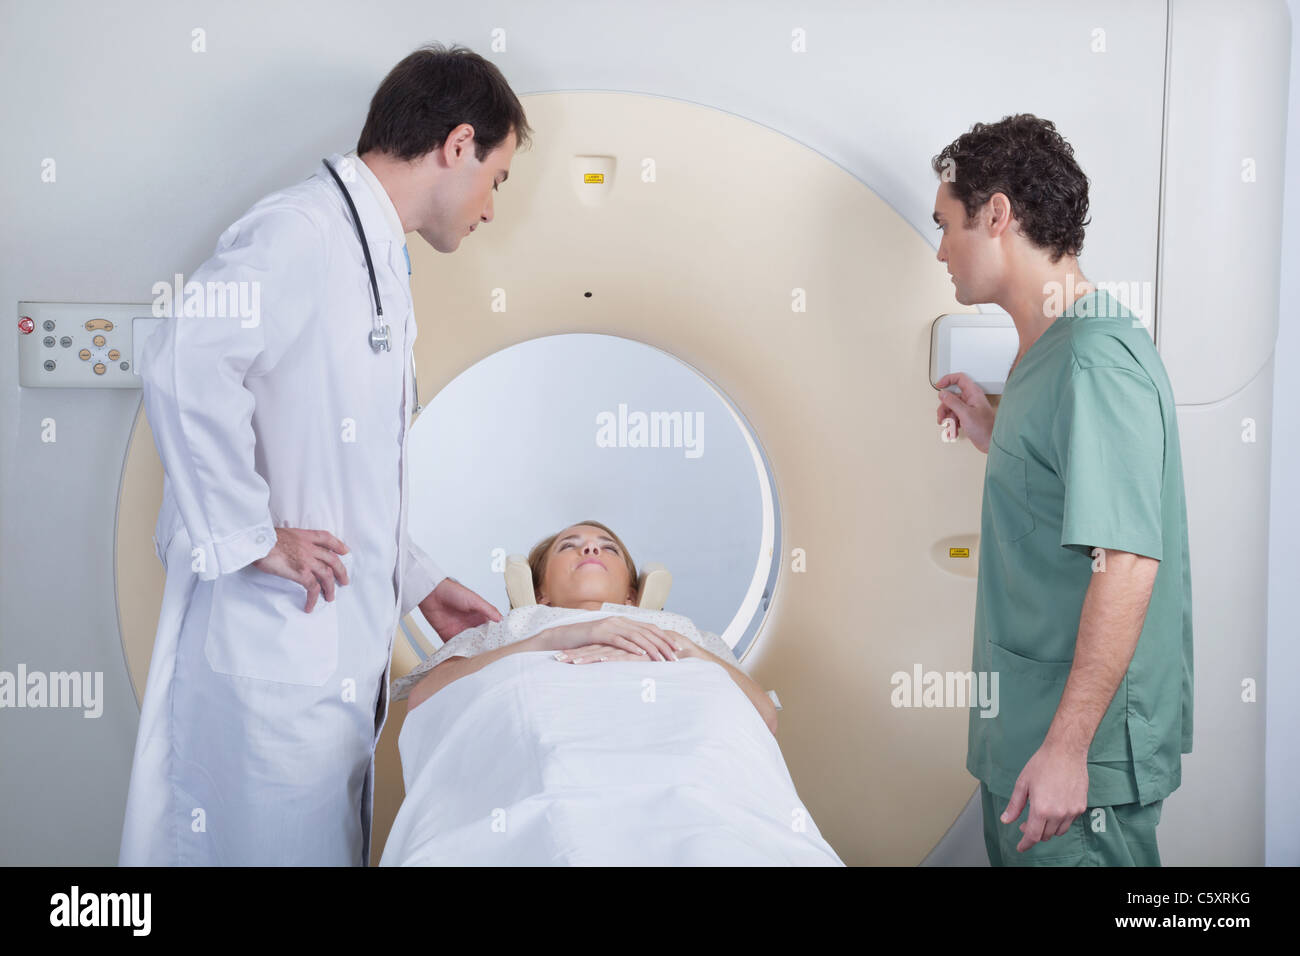 Doctor with technician examining patient before CT scan test Stock Photo